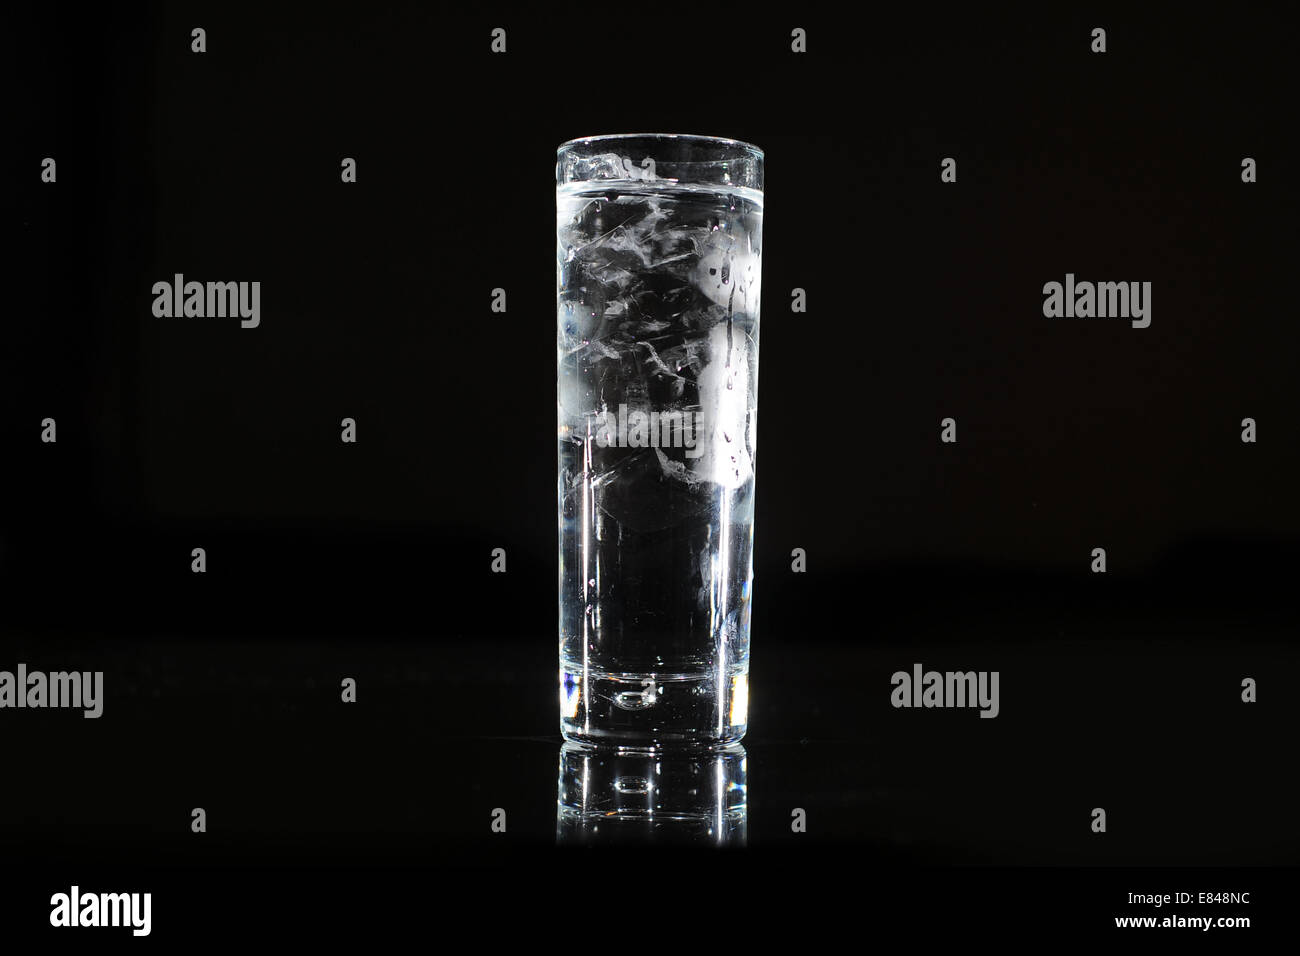 A glass of clear drinking water from a tap against a black background. Stock Photo